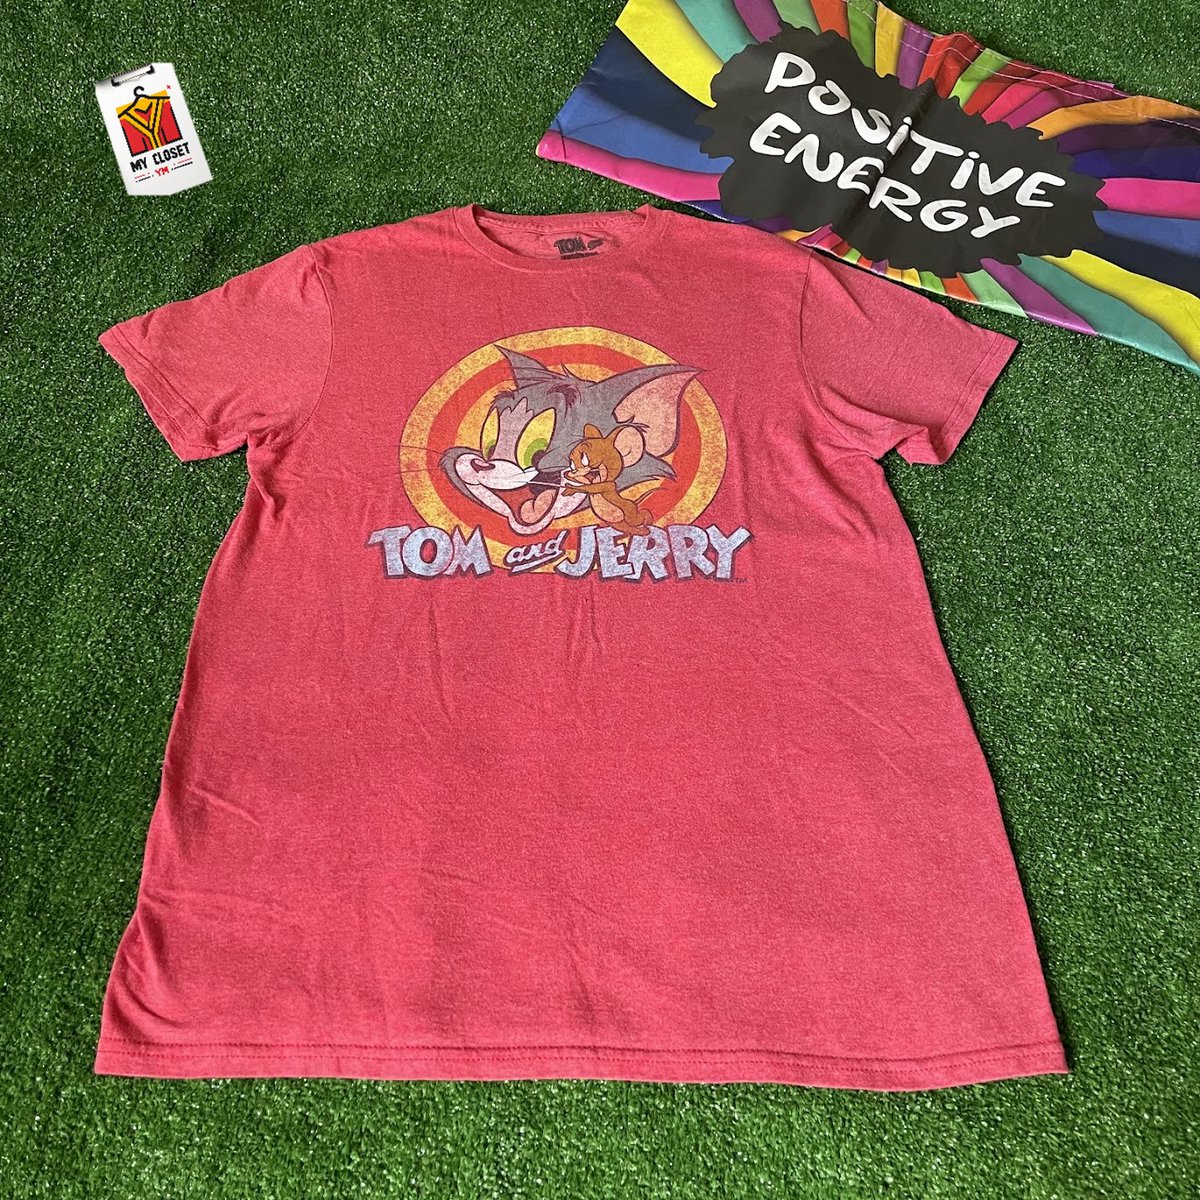 Tom and Jerry Short Sleeve Crew Neck Y2K Style Distressed Graphic T-Shirt Size S

#TomAndJerryFashion
#ShortSleeveTee
#CrewNeckStyle
#Y2KStyle
#DistressedGraphic
#CartoonTShirt
#SizeSFashion
#NostalgicFashion
#IconicCharacters
#VintageVibes

ebay.com/itm/1264566689…